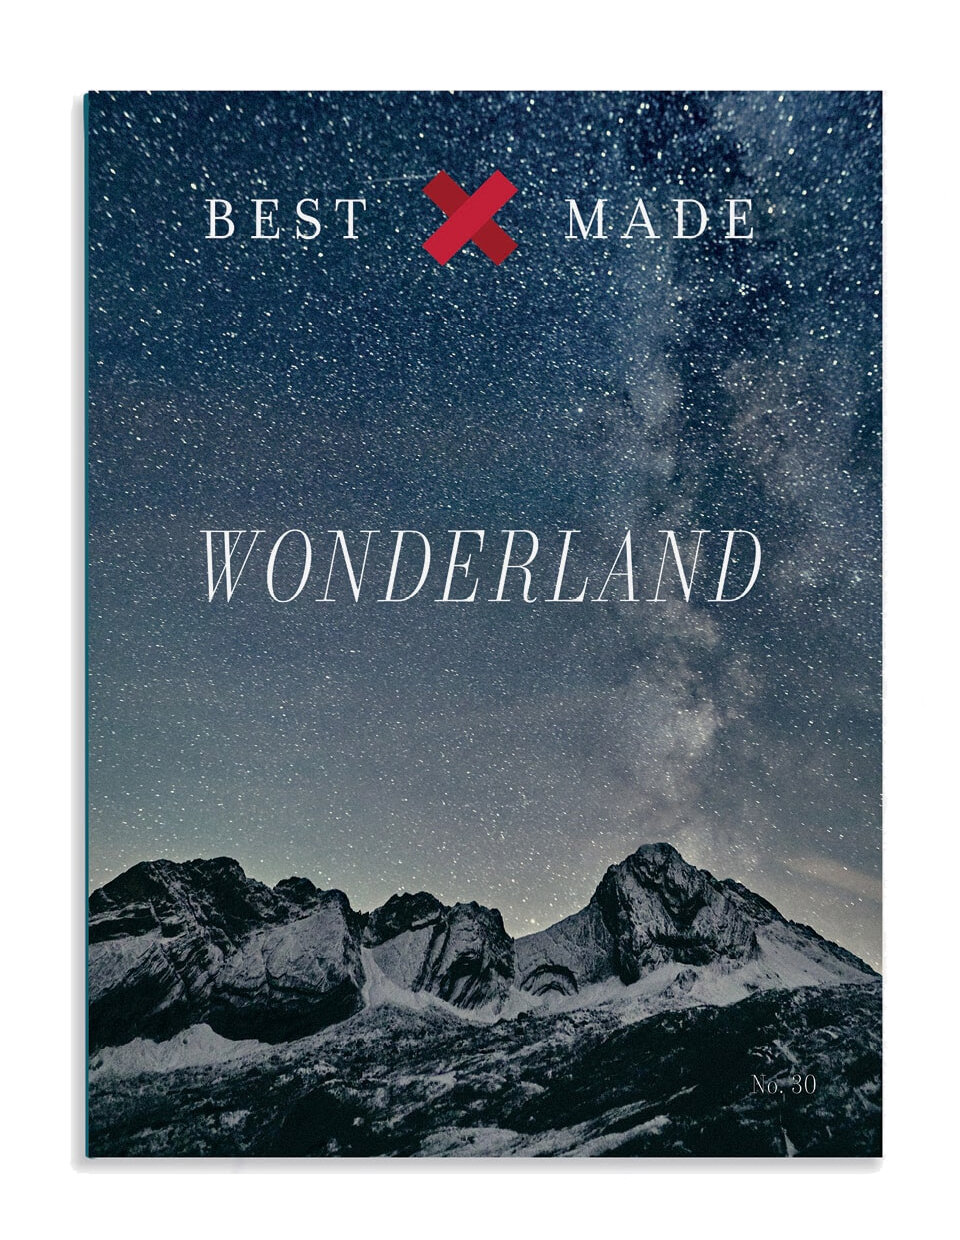  Best Made Co. Catalog No. 30 shot on location in Bavaria, Germany. 